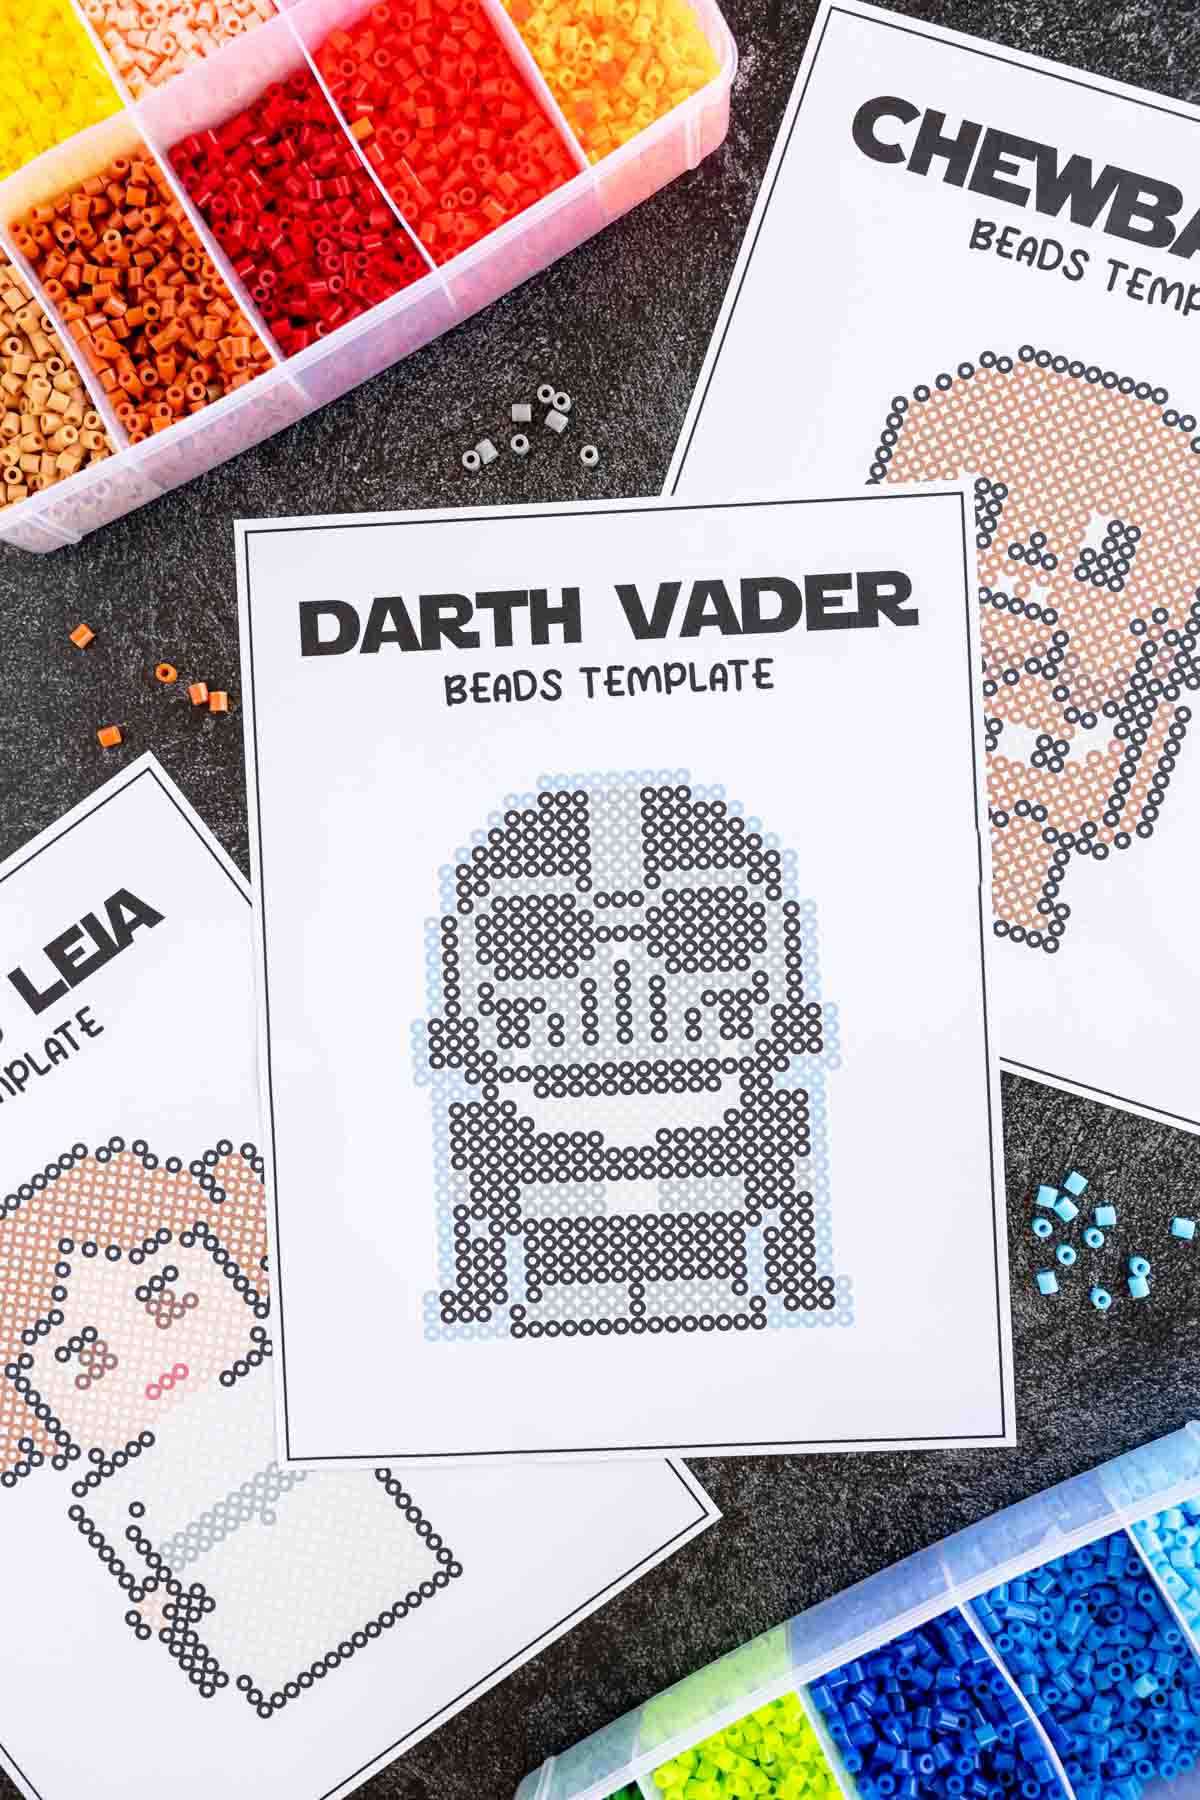 Printed out Star Wars perler beads 